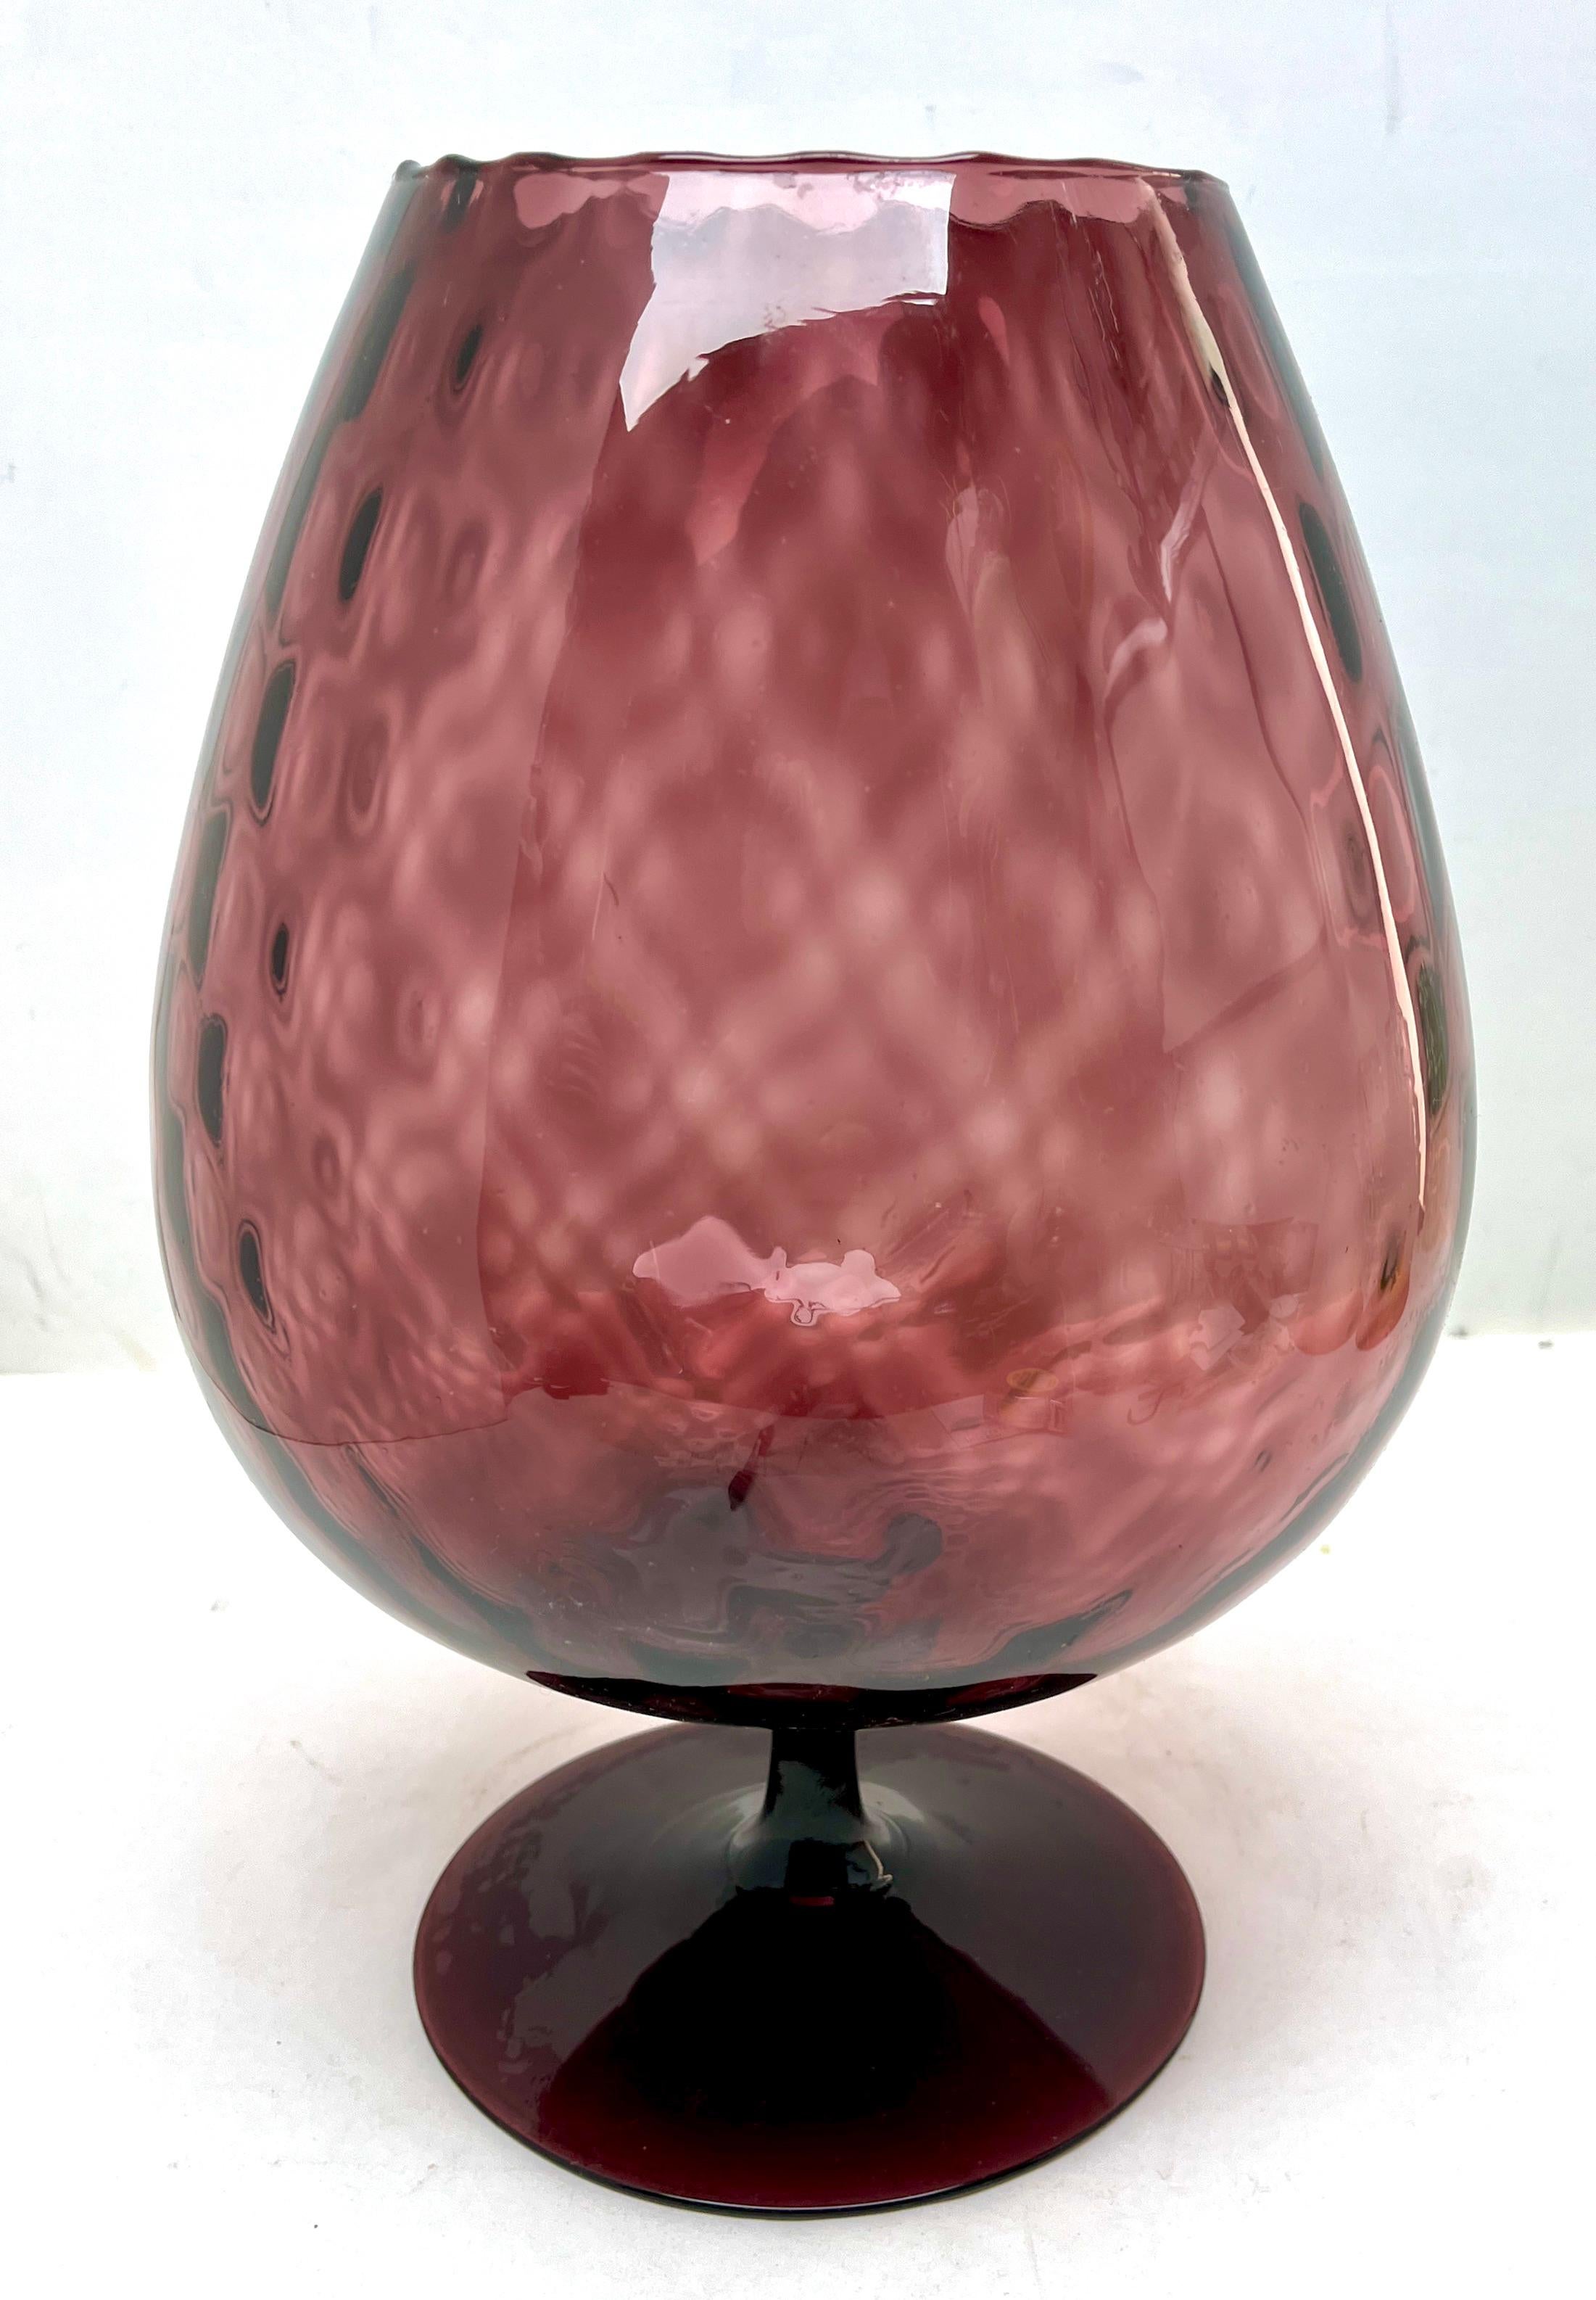 Opaline di Florence (Empoli) opalescent Italian art glass vase the late 1950s or early 1960s. 

Beautiful hand-blown opal and hand-applied one foot
Measures: 32 cm tall, diameter 20 cm

The piece is in excellent condition and a real